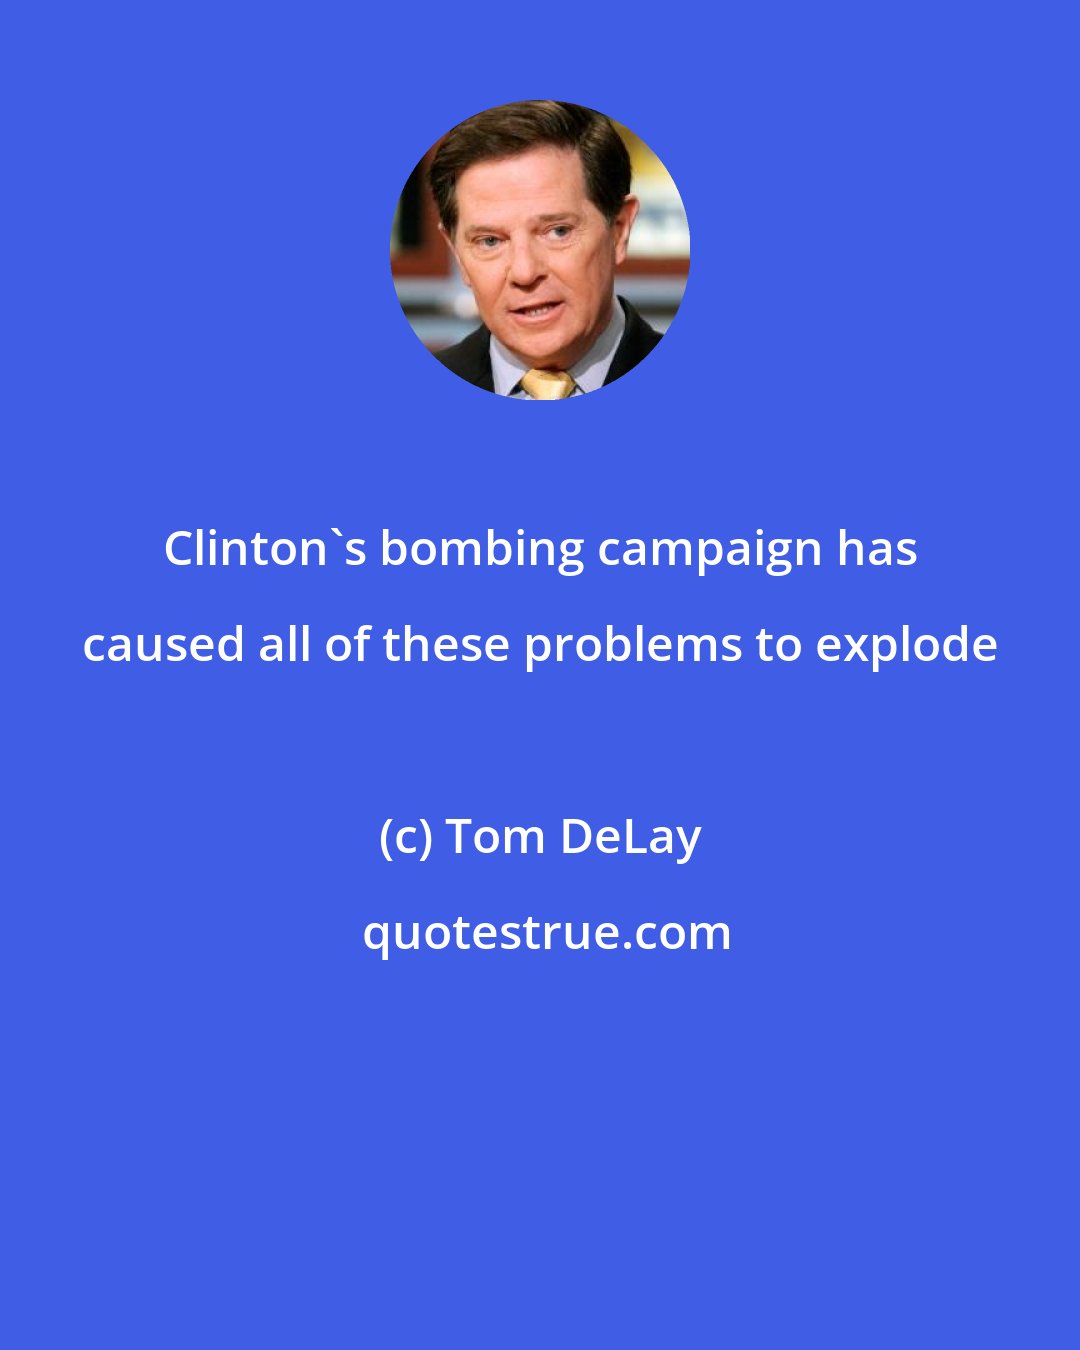 Tom DeLay: Clinton's bombing campaign has caused all of these problems to explode